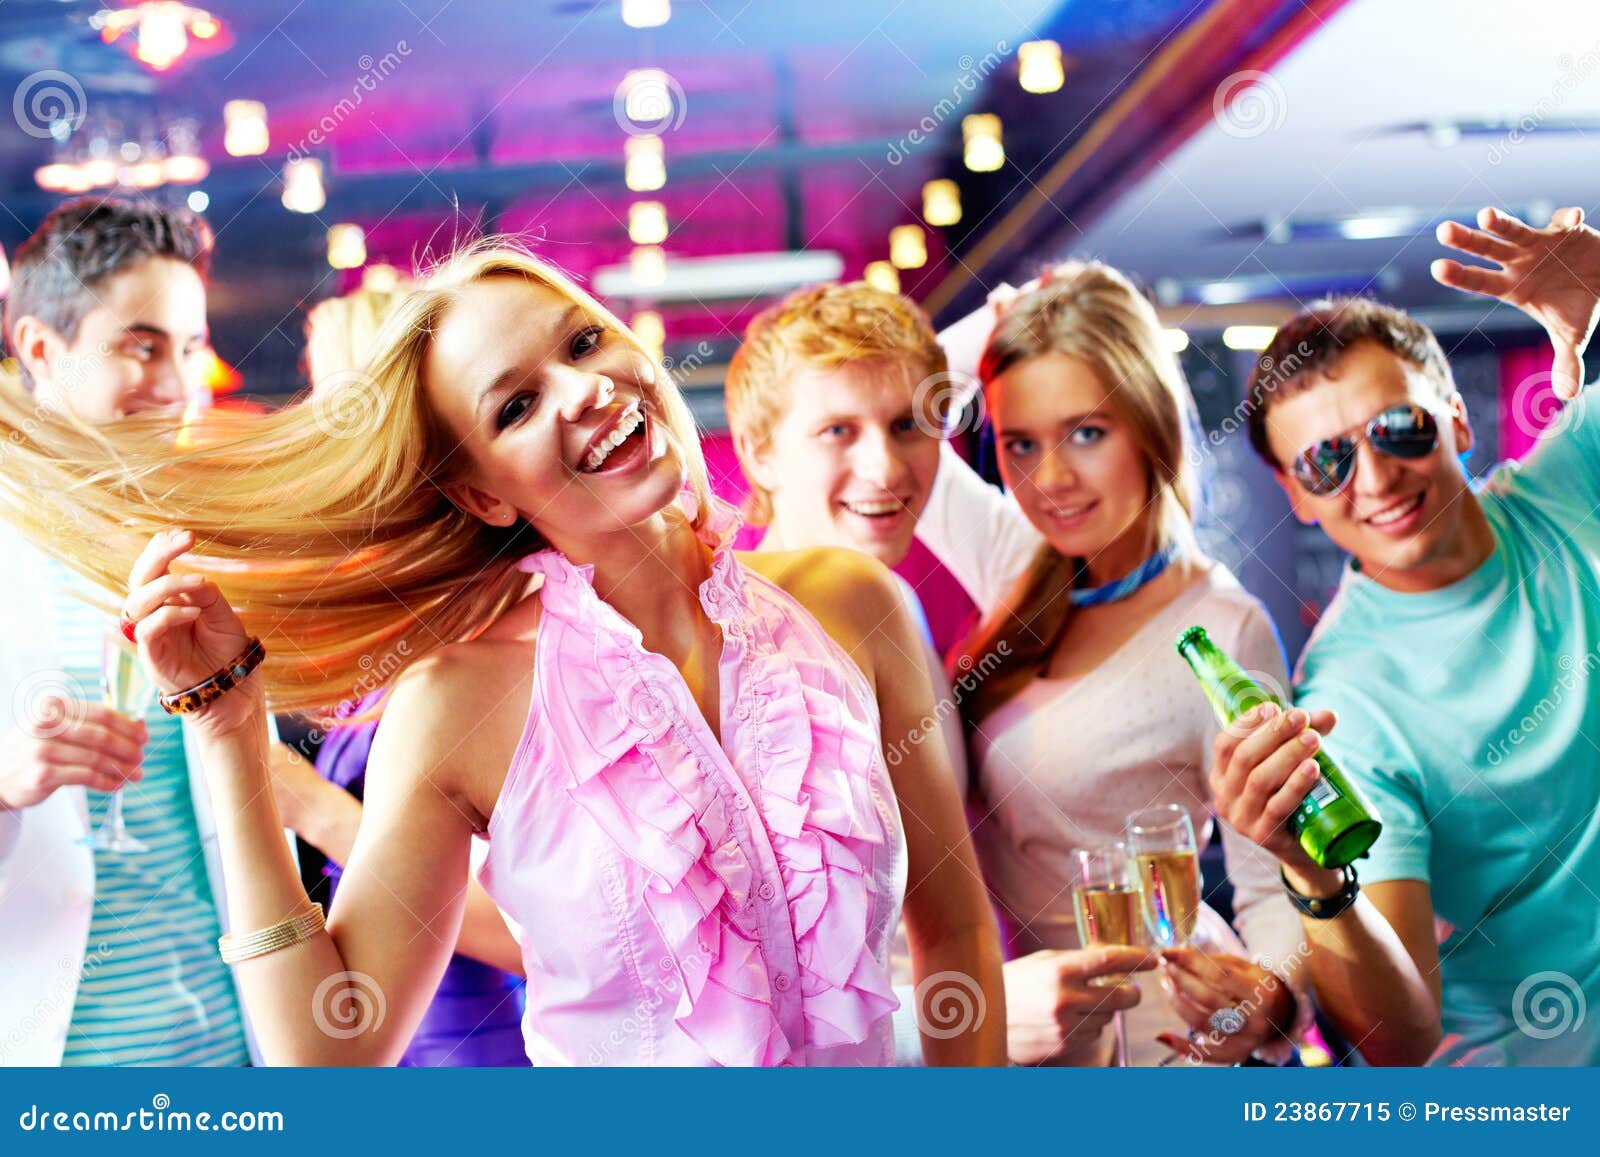 Energetic dancer stock image. Image of happy, face, clubbing - 23867715